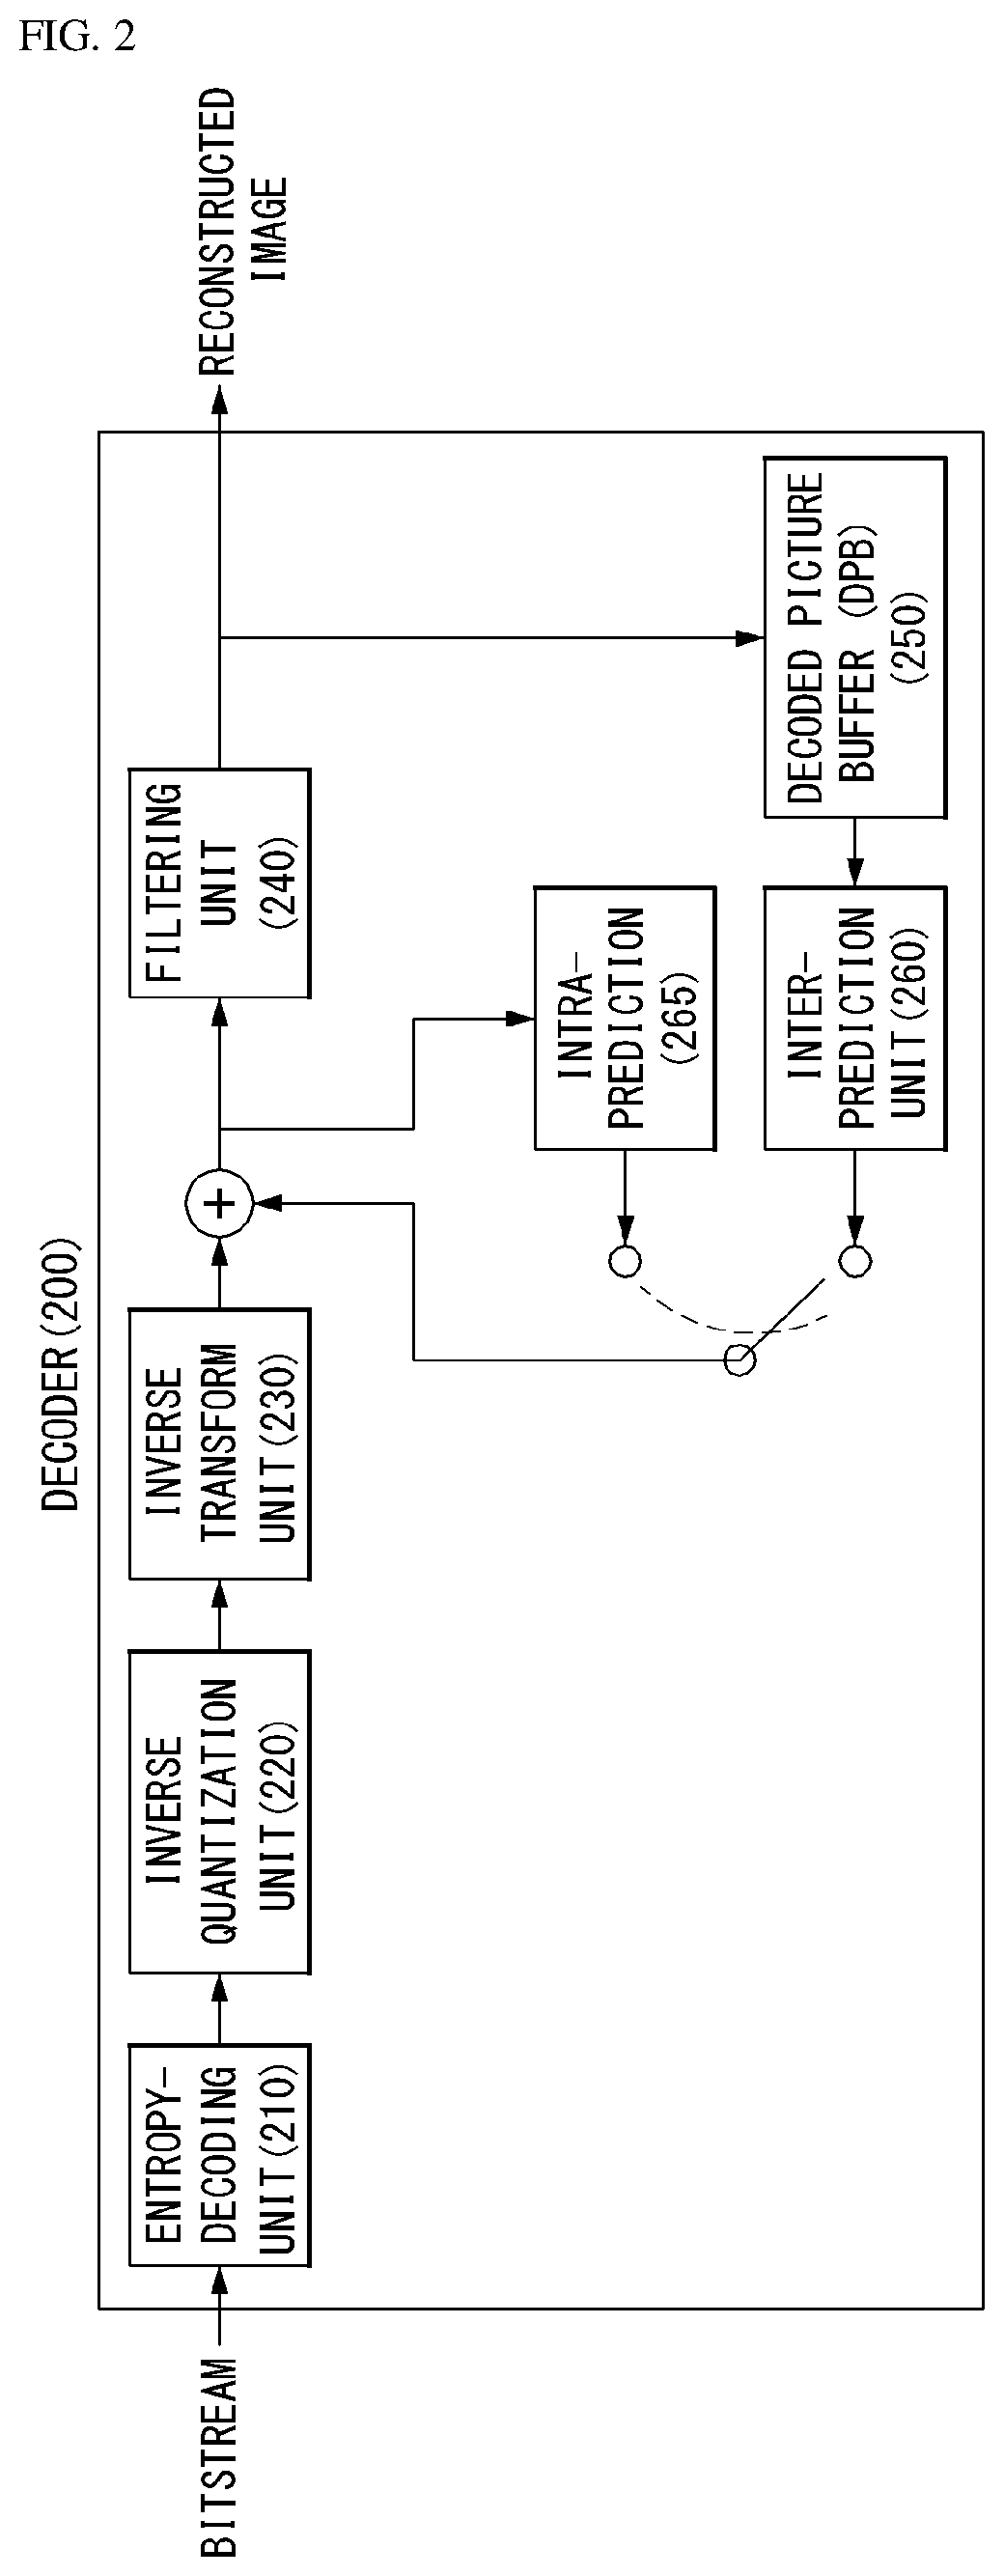 Method and apparatus for encoding/decoding video signal by using edge-adaptive graph-based transform